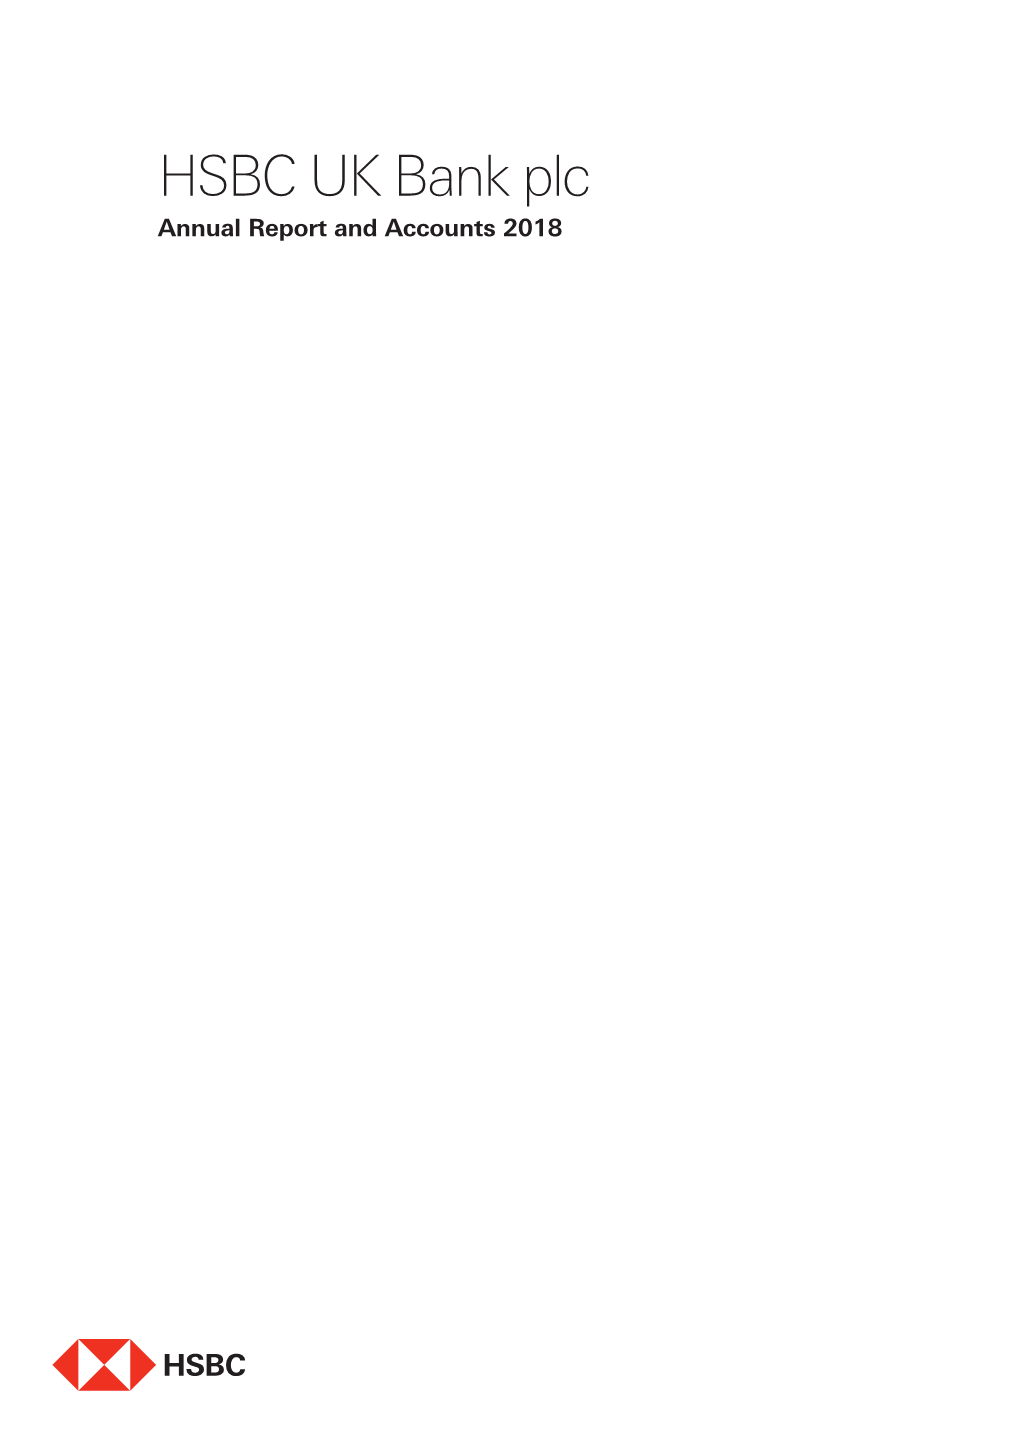 HSBC UK Bank Plc Annual Report and Accounts 2018